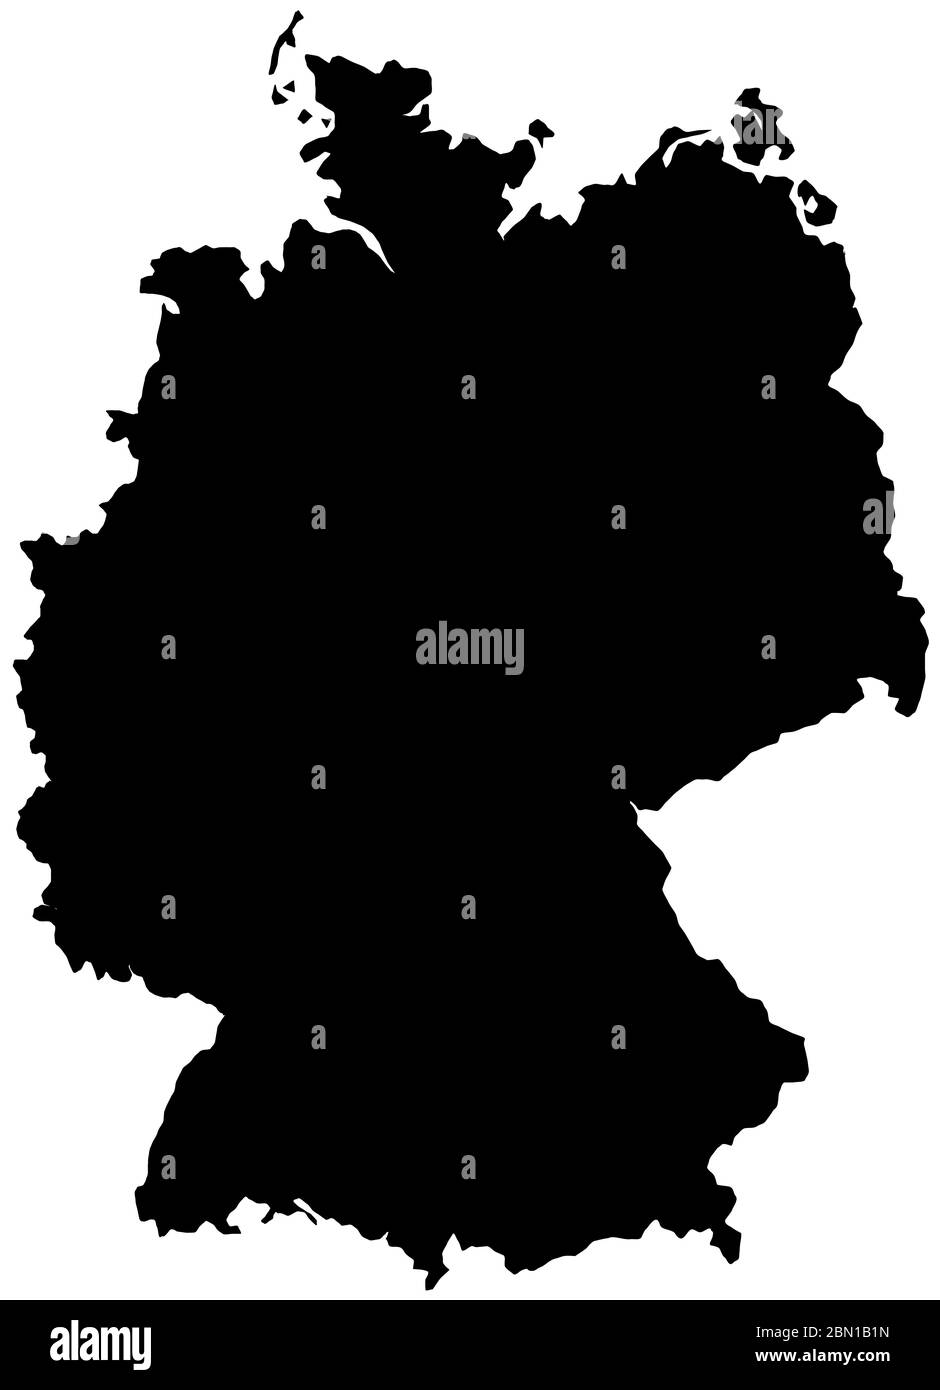 Map of Germany filled with black color Stock Photo